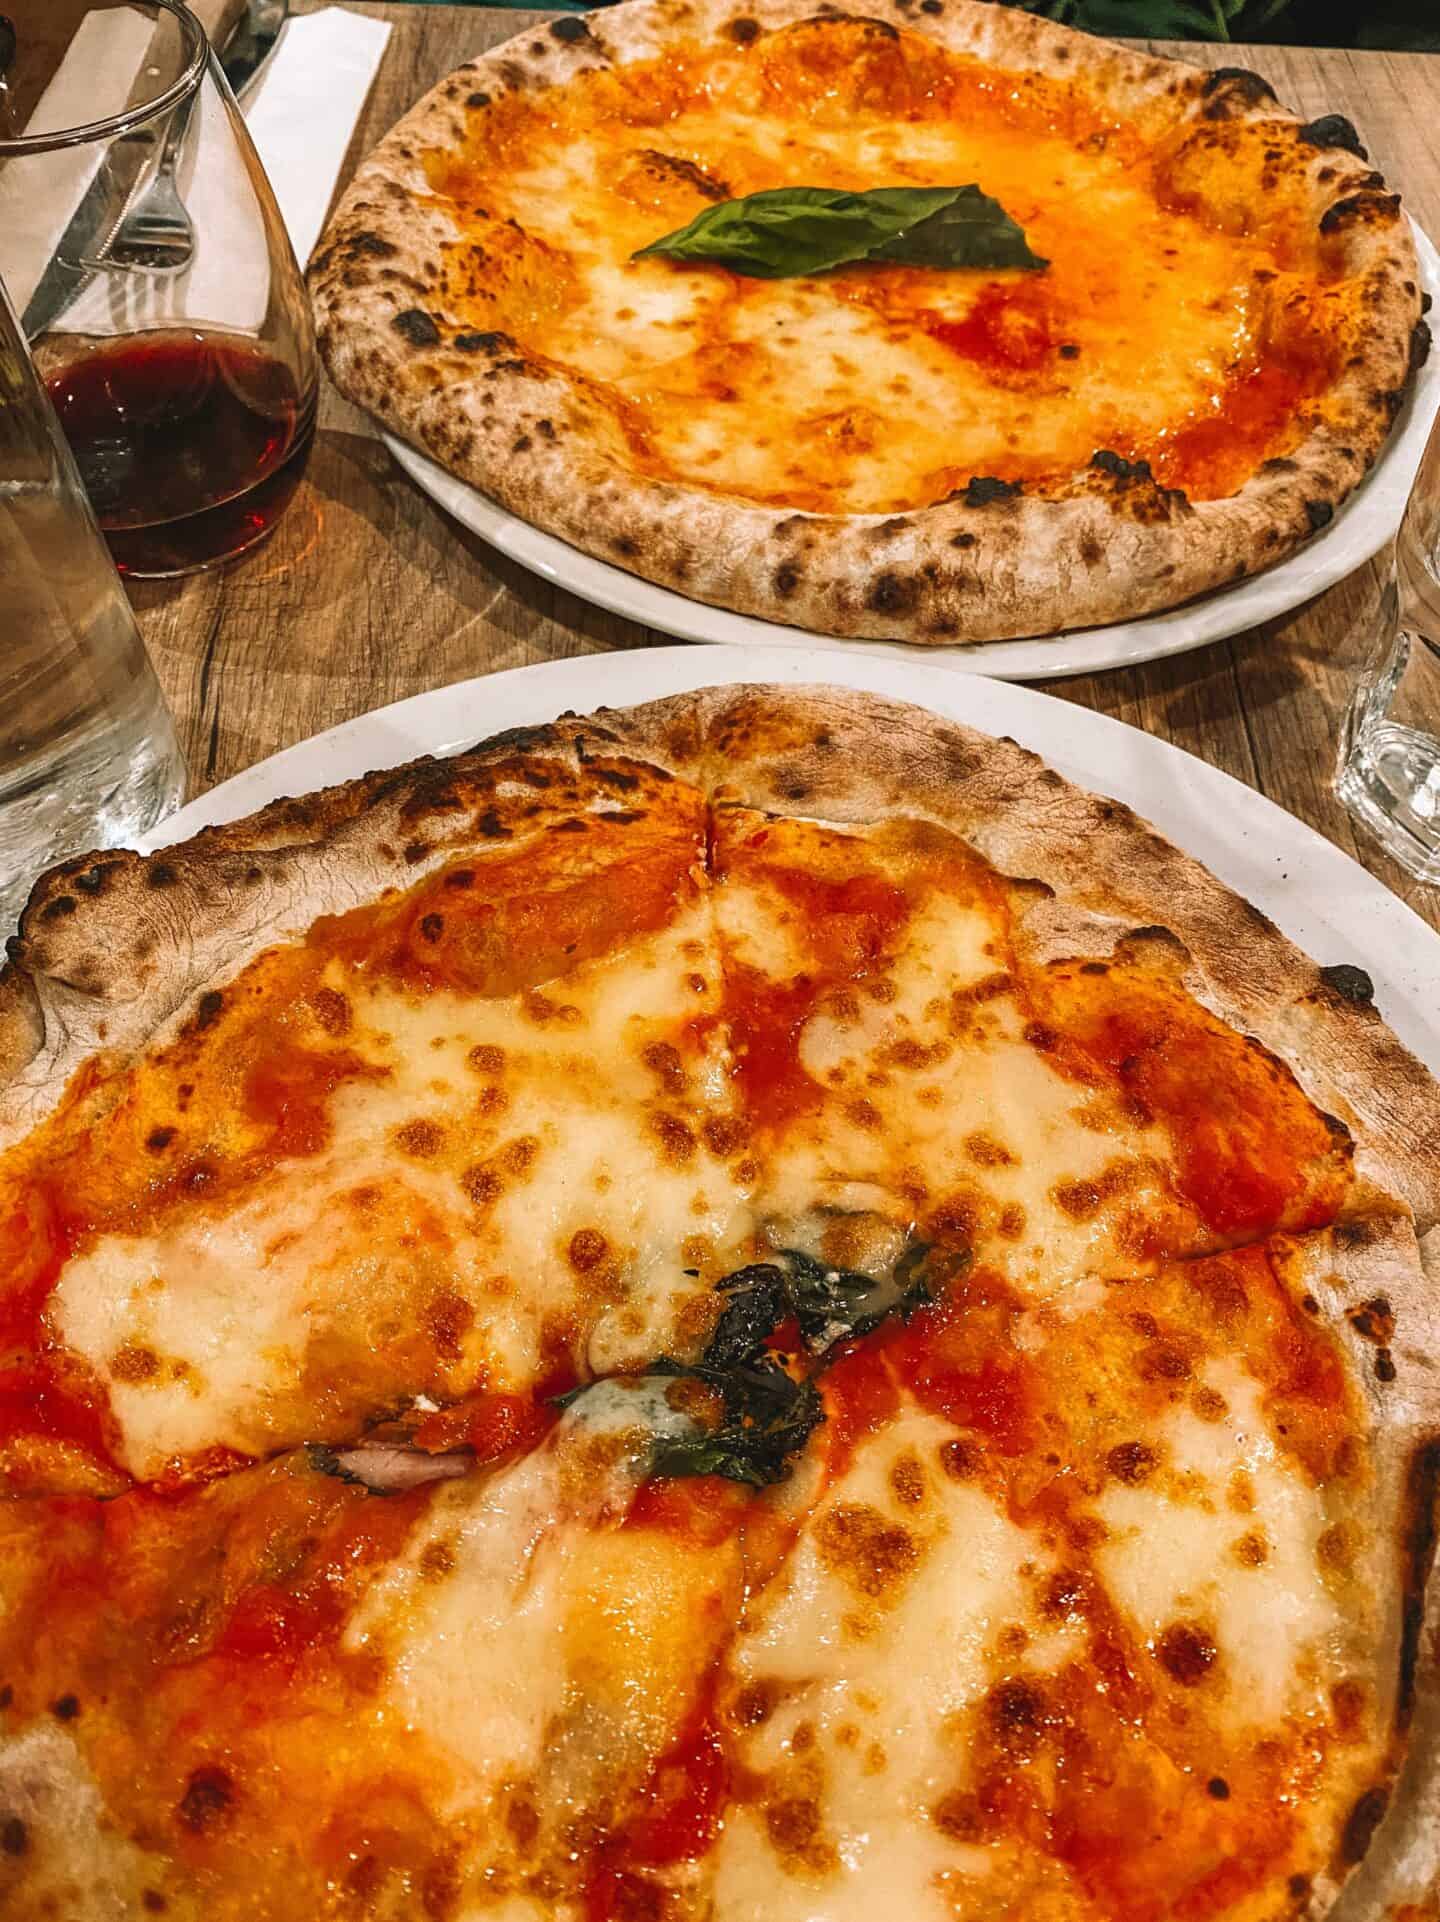 Add a stop for delicious Neapolitan pizza from Pizzeria via Mercanti to your 4 day Toronto itinerary